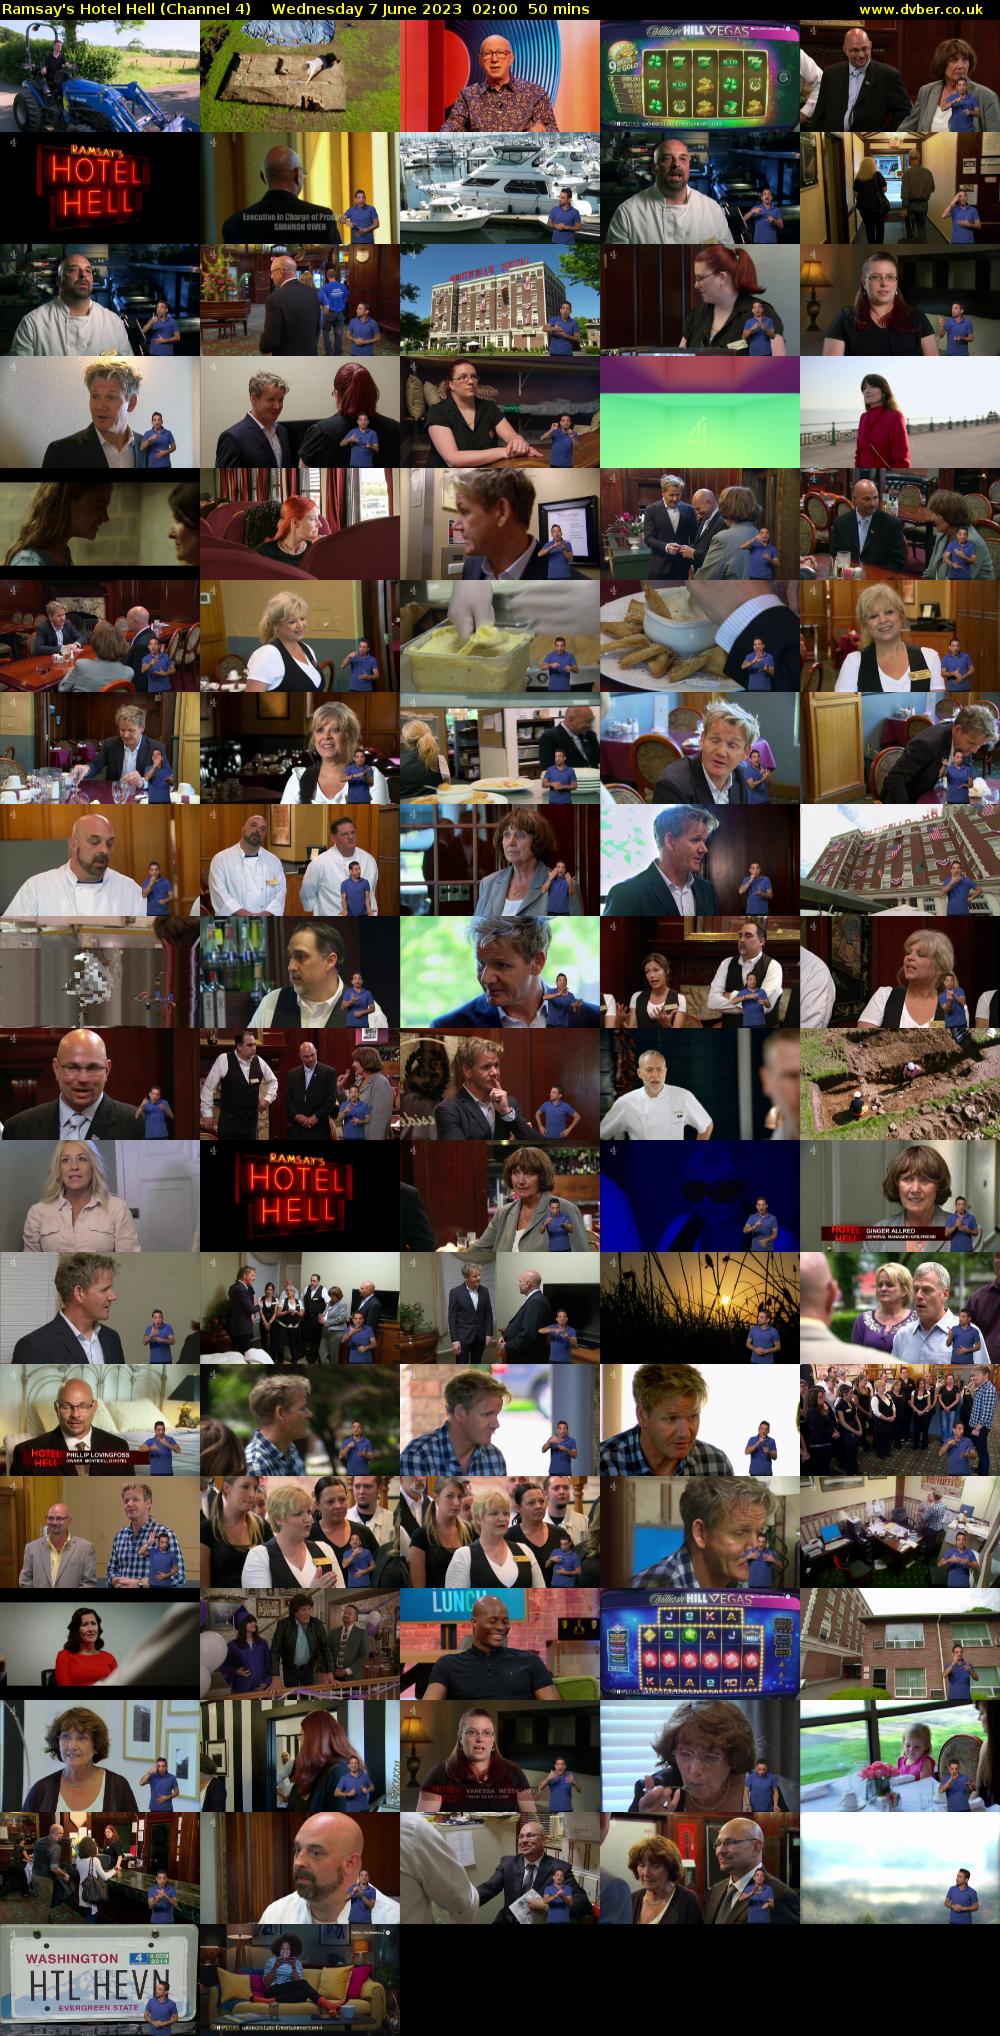 Ramsay's Hotel Hell (Channel 4) Wednesday 7 June 2023 02:00 - 02:50